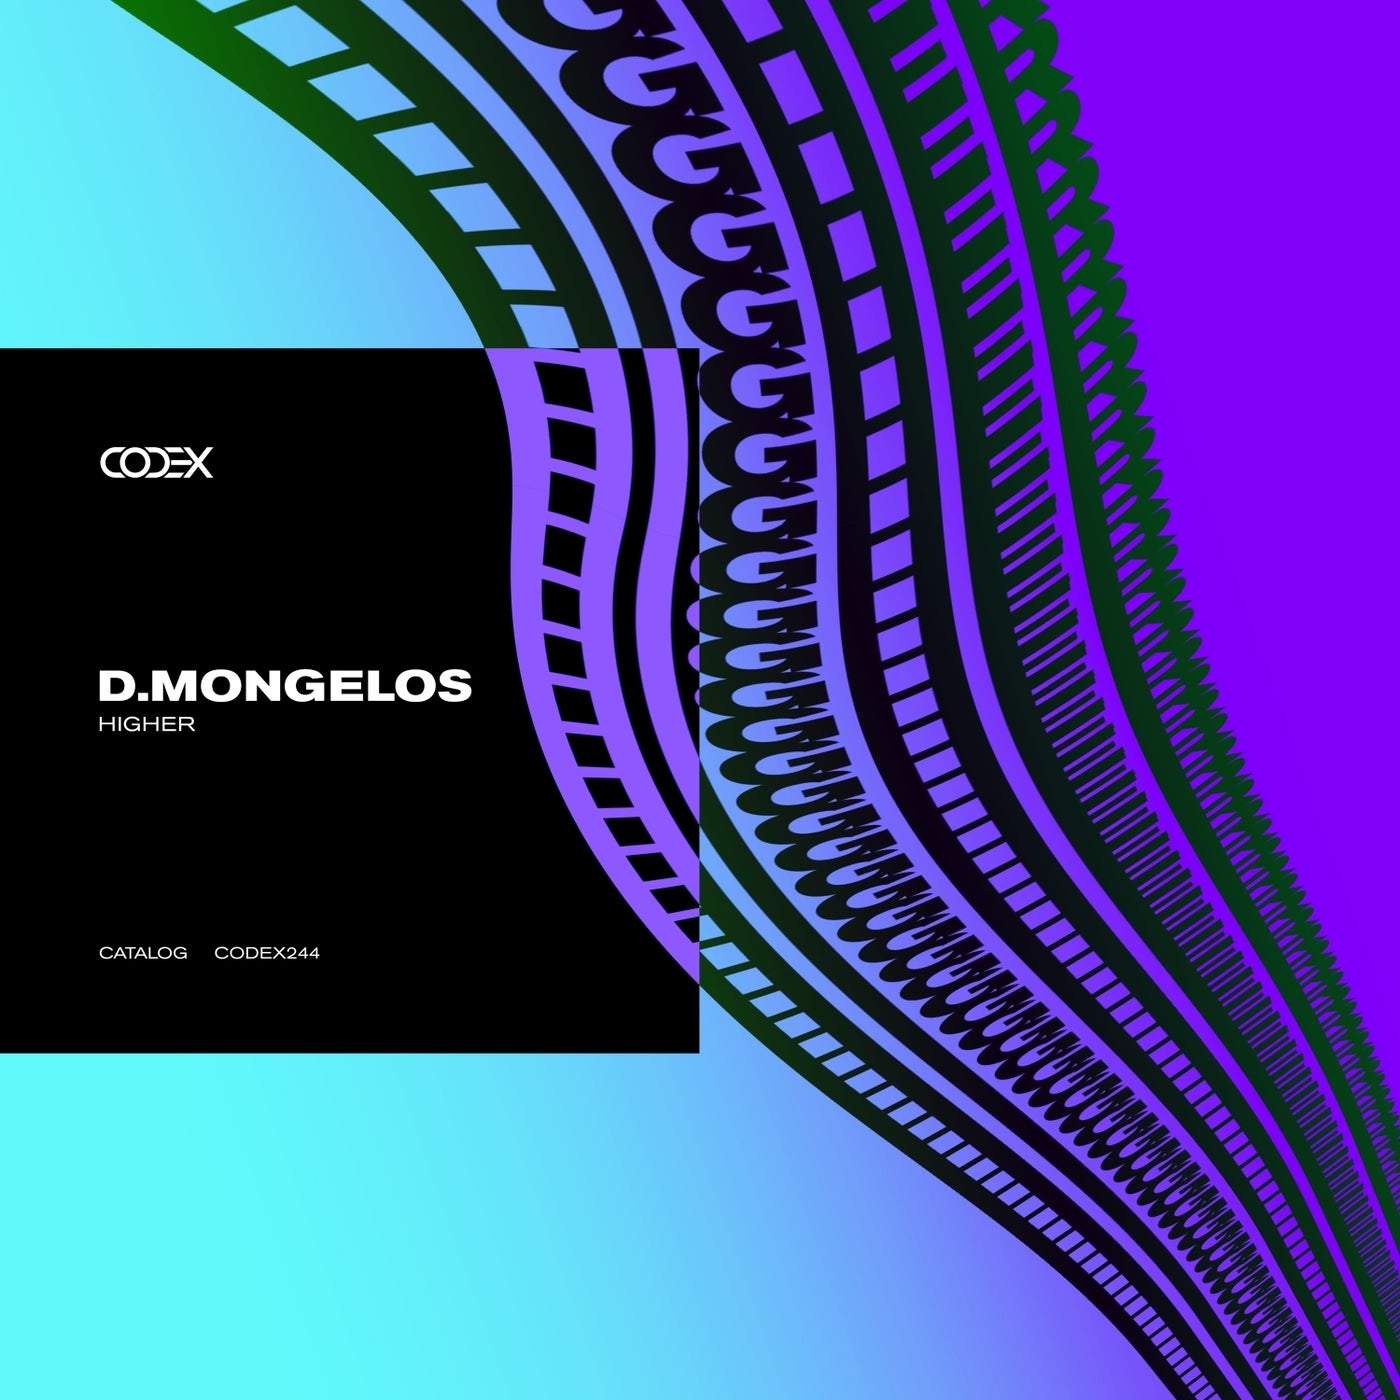 image cover: D.Mongelos - Higher on Codex Recordings